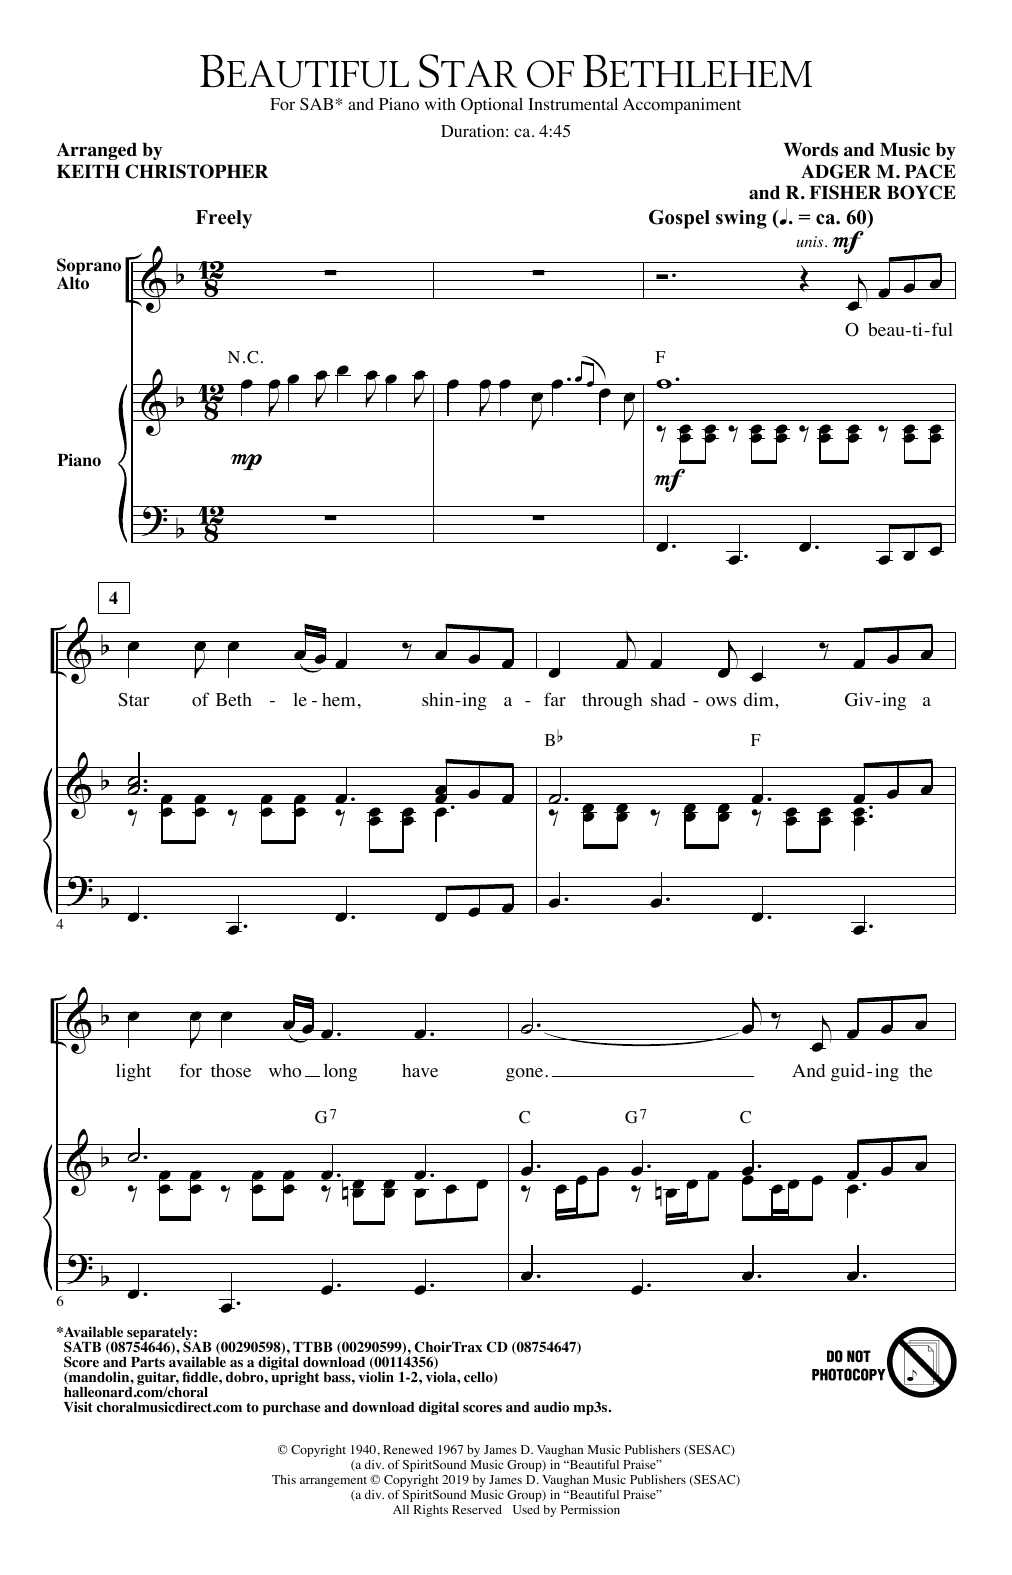 Adger M. Pace and R. Fisher Boyce Beautiful Star Of Bethlehem (arr. Keith Christopher) Sheet Music